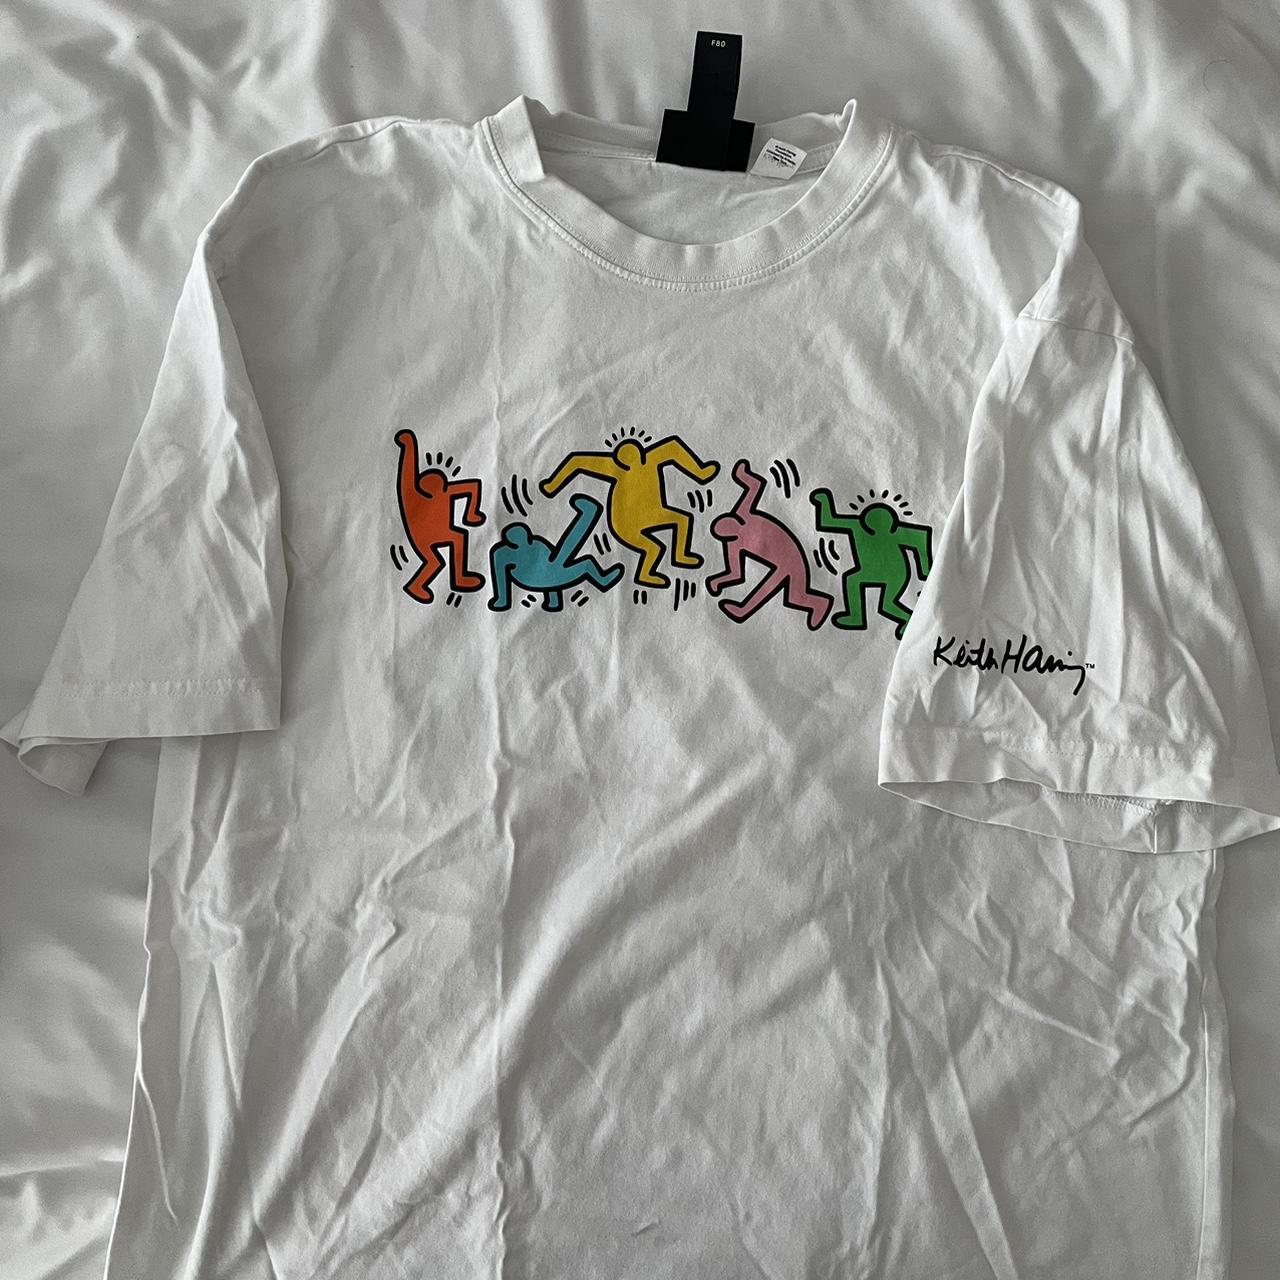 new without tags keith haring tee men’s size large - Depop